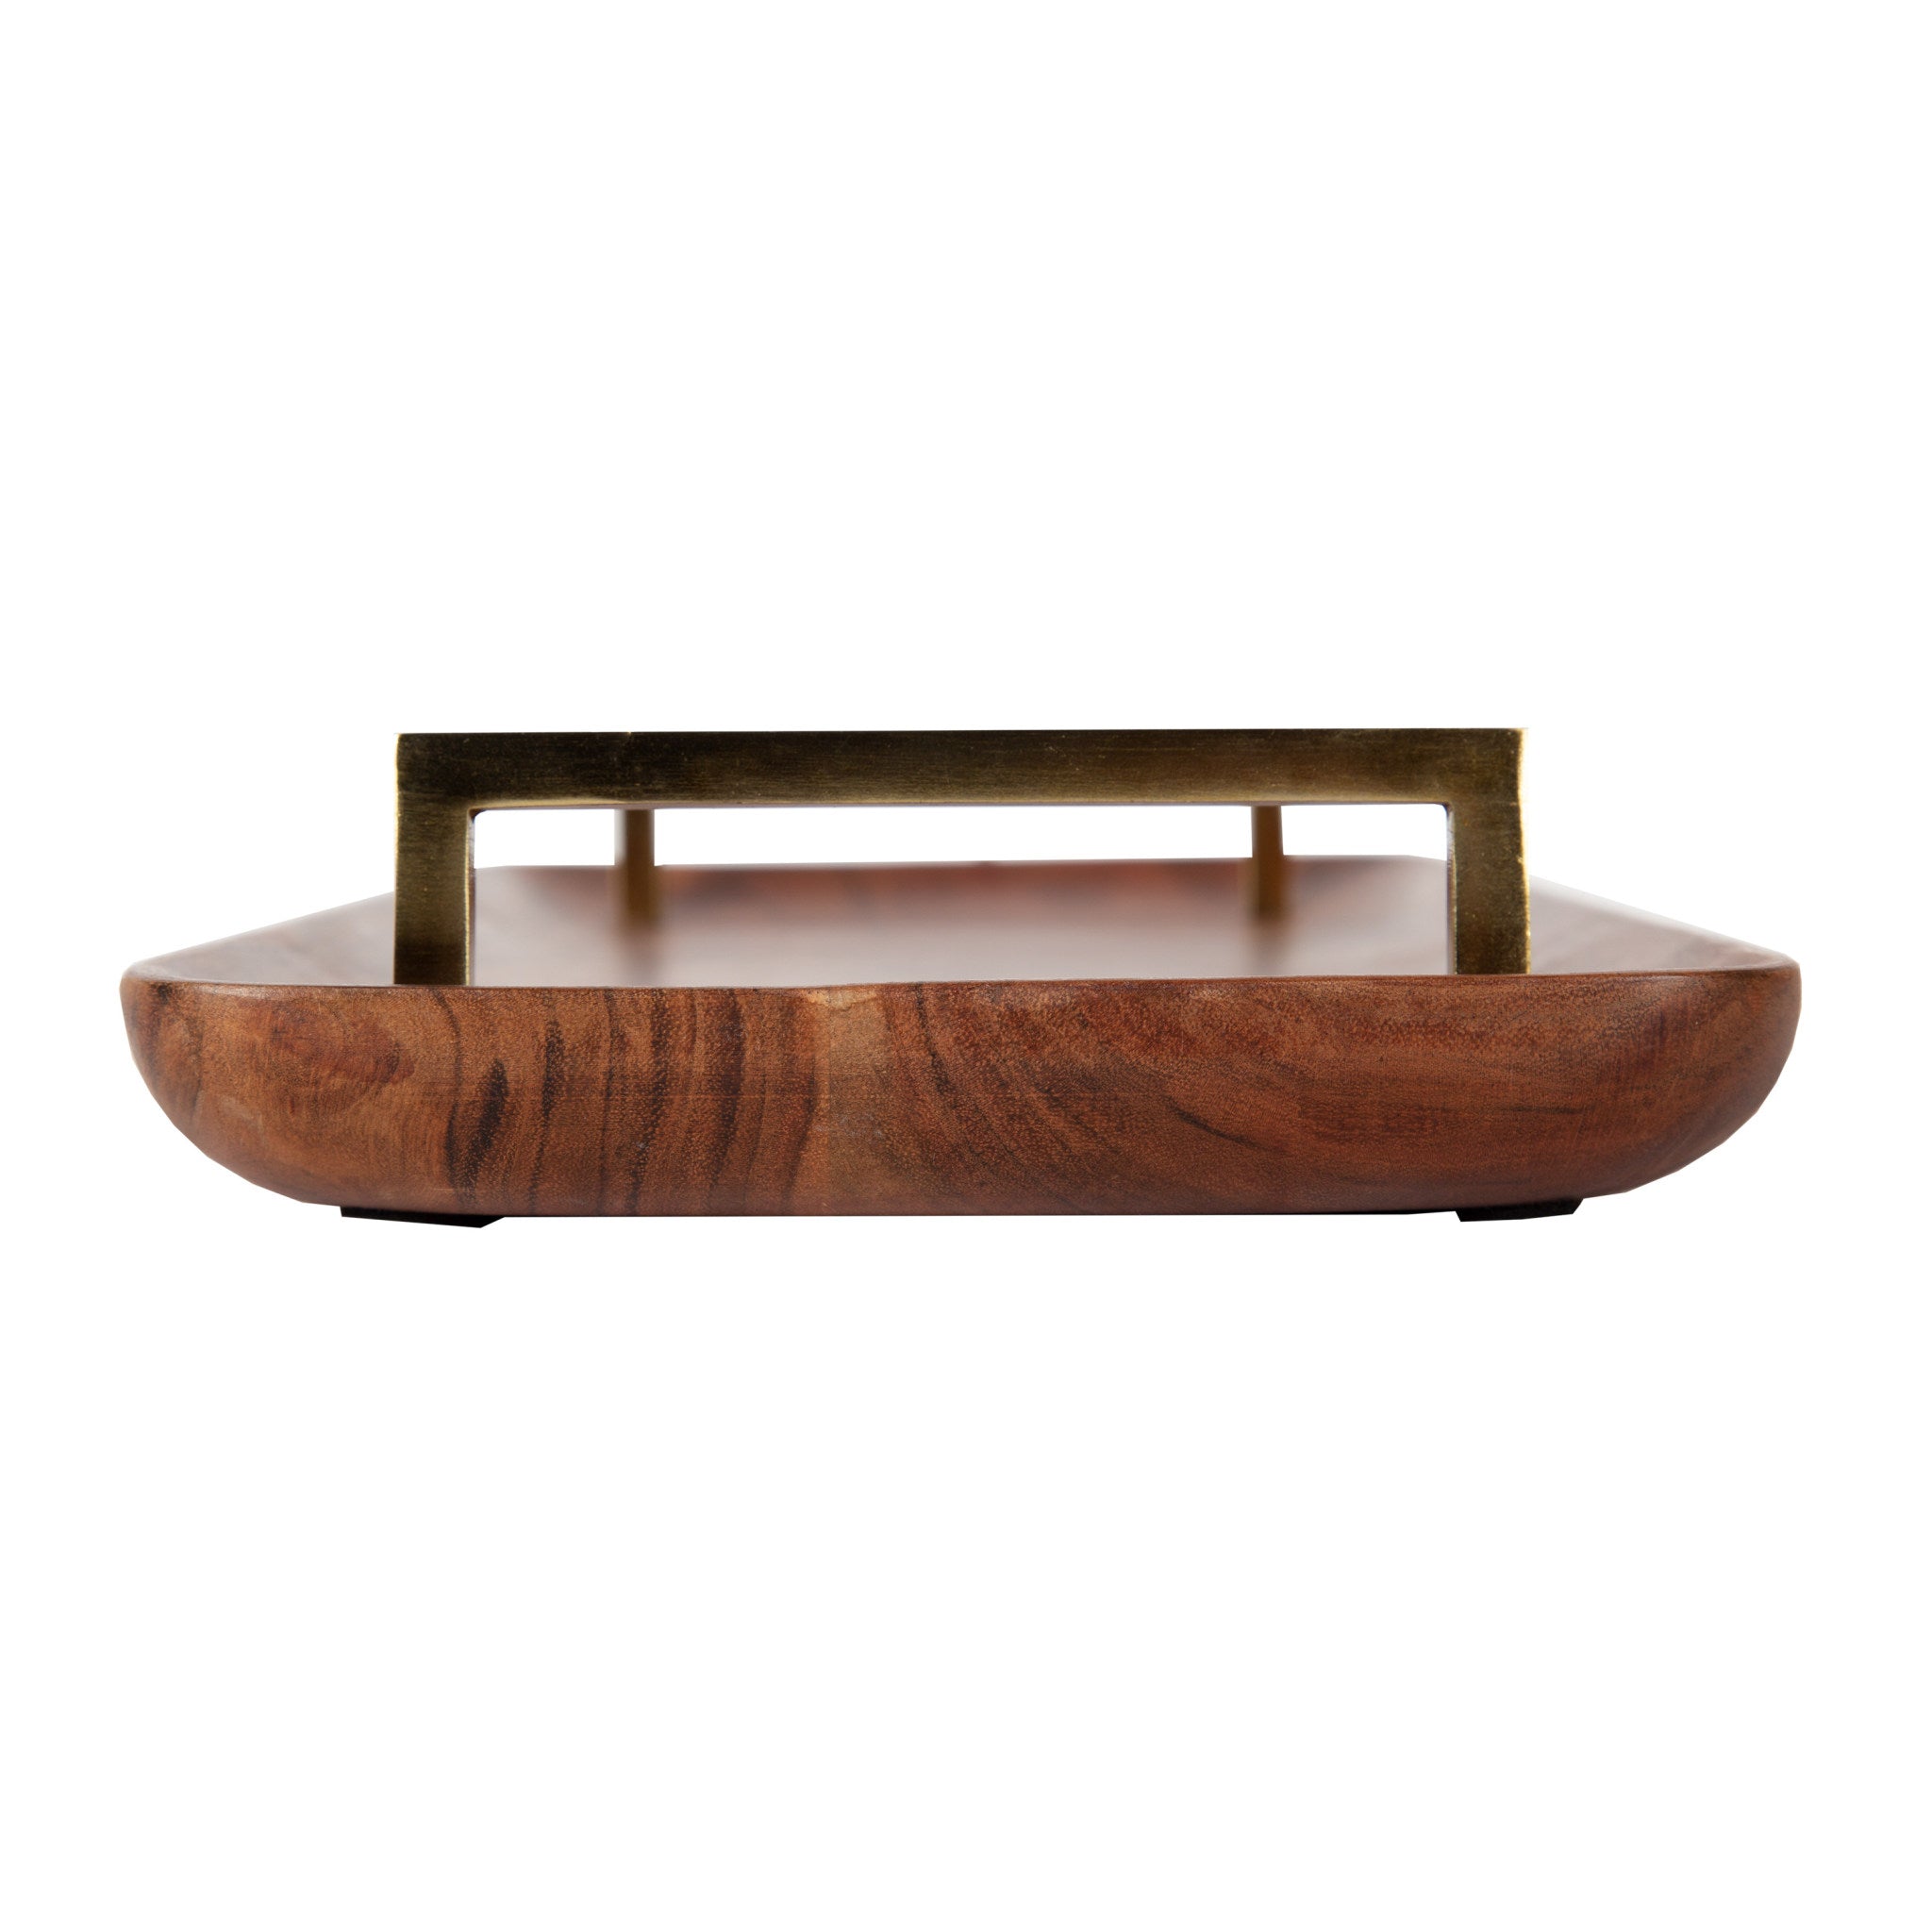 Cantwell Wood Decorative Tray